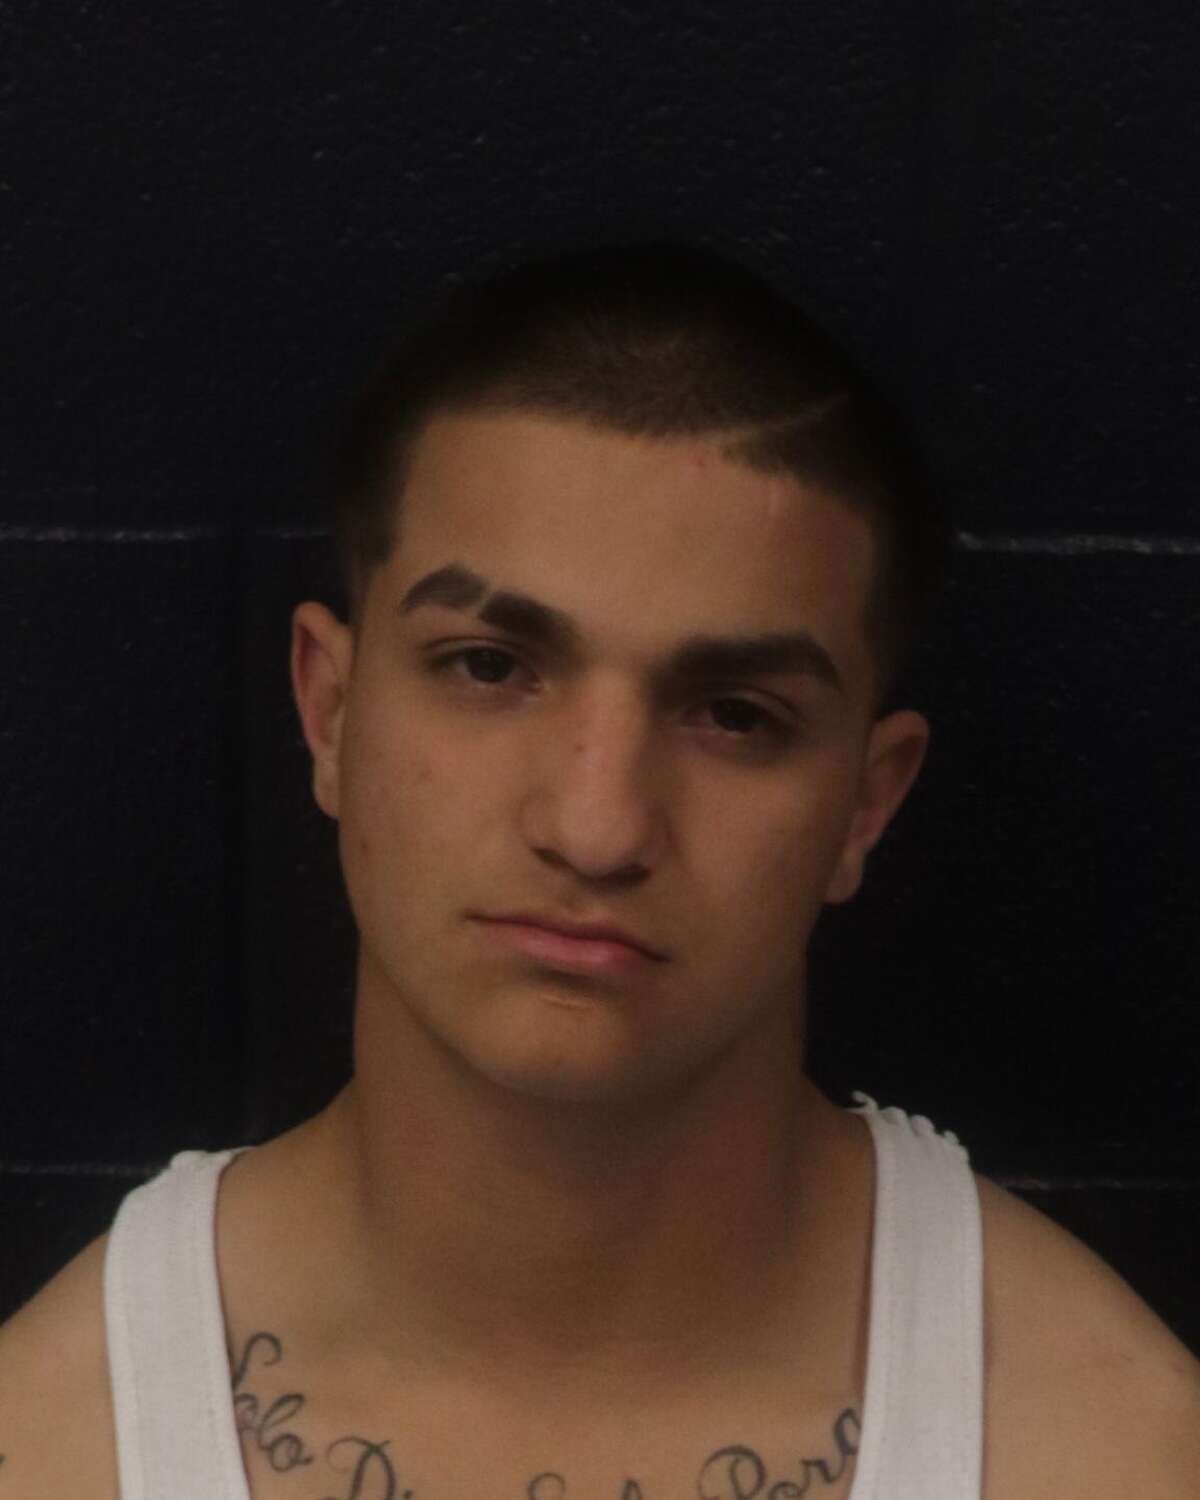 Andres Gonzalo Arce was arrested by Laredo police after allegedly holding six people at gunpoint as part of a spree of four separate robberies on the night of March 15, 2022.